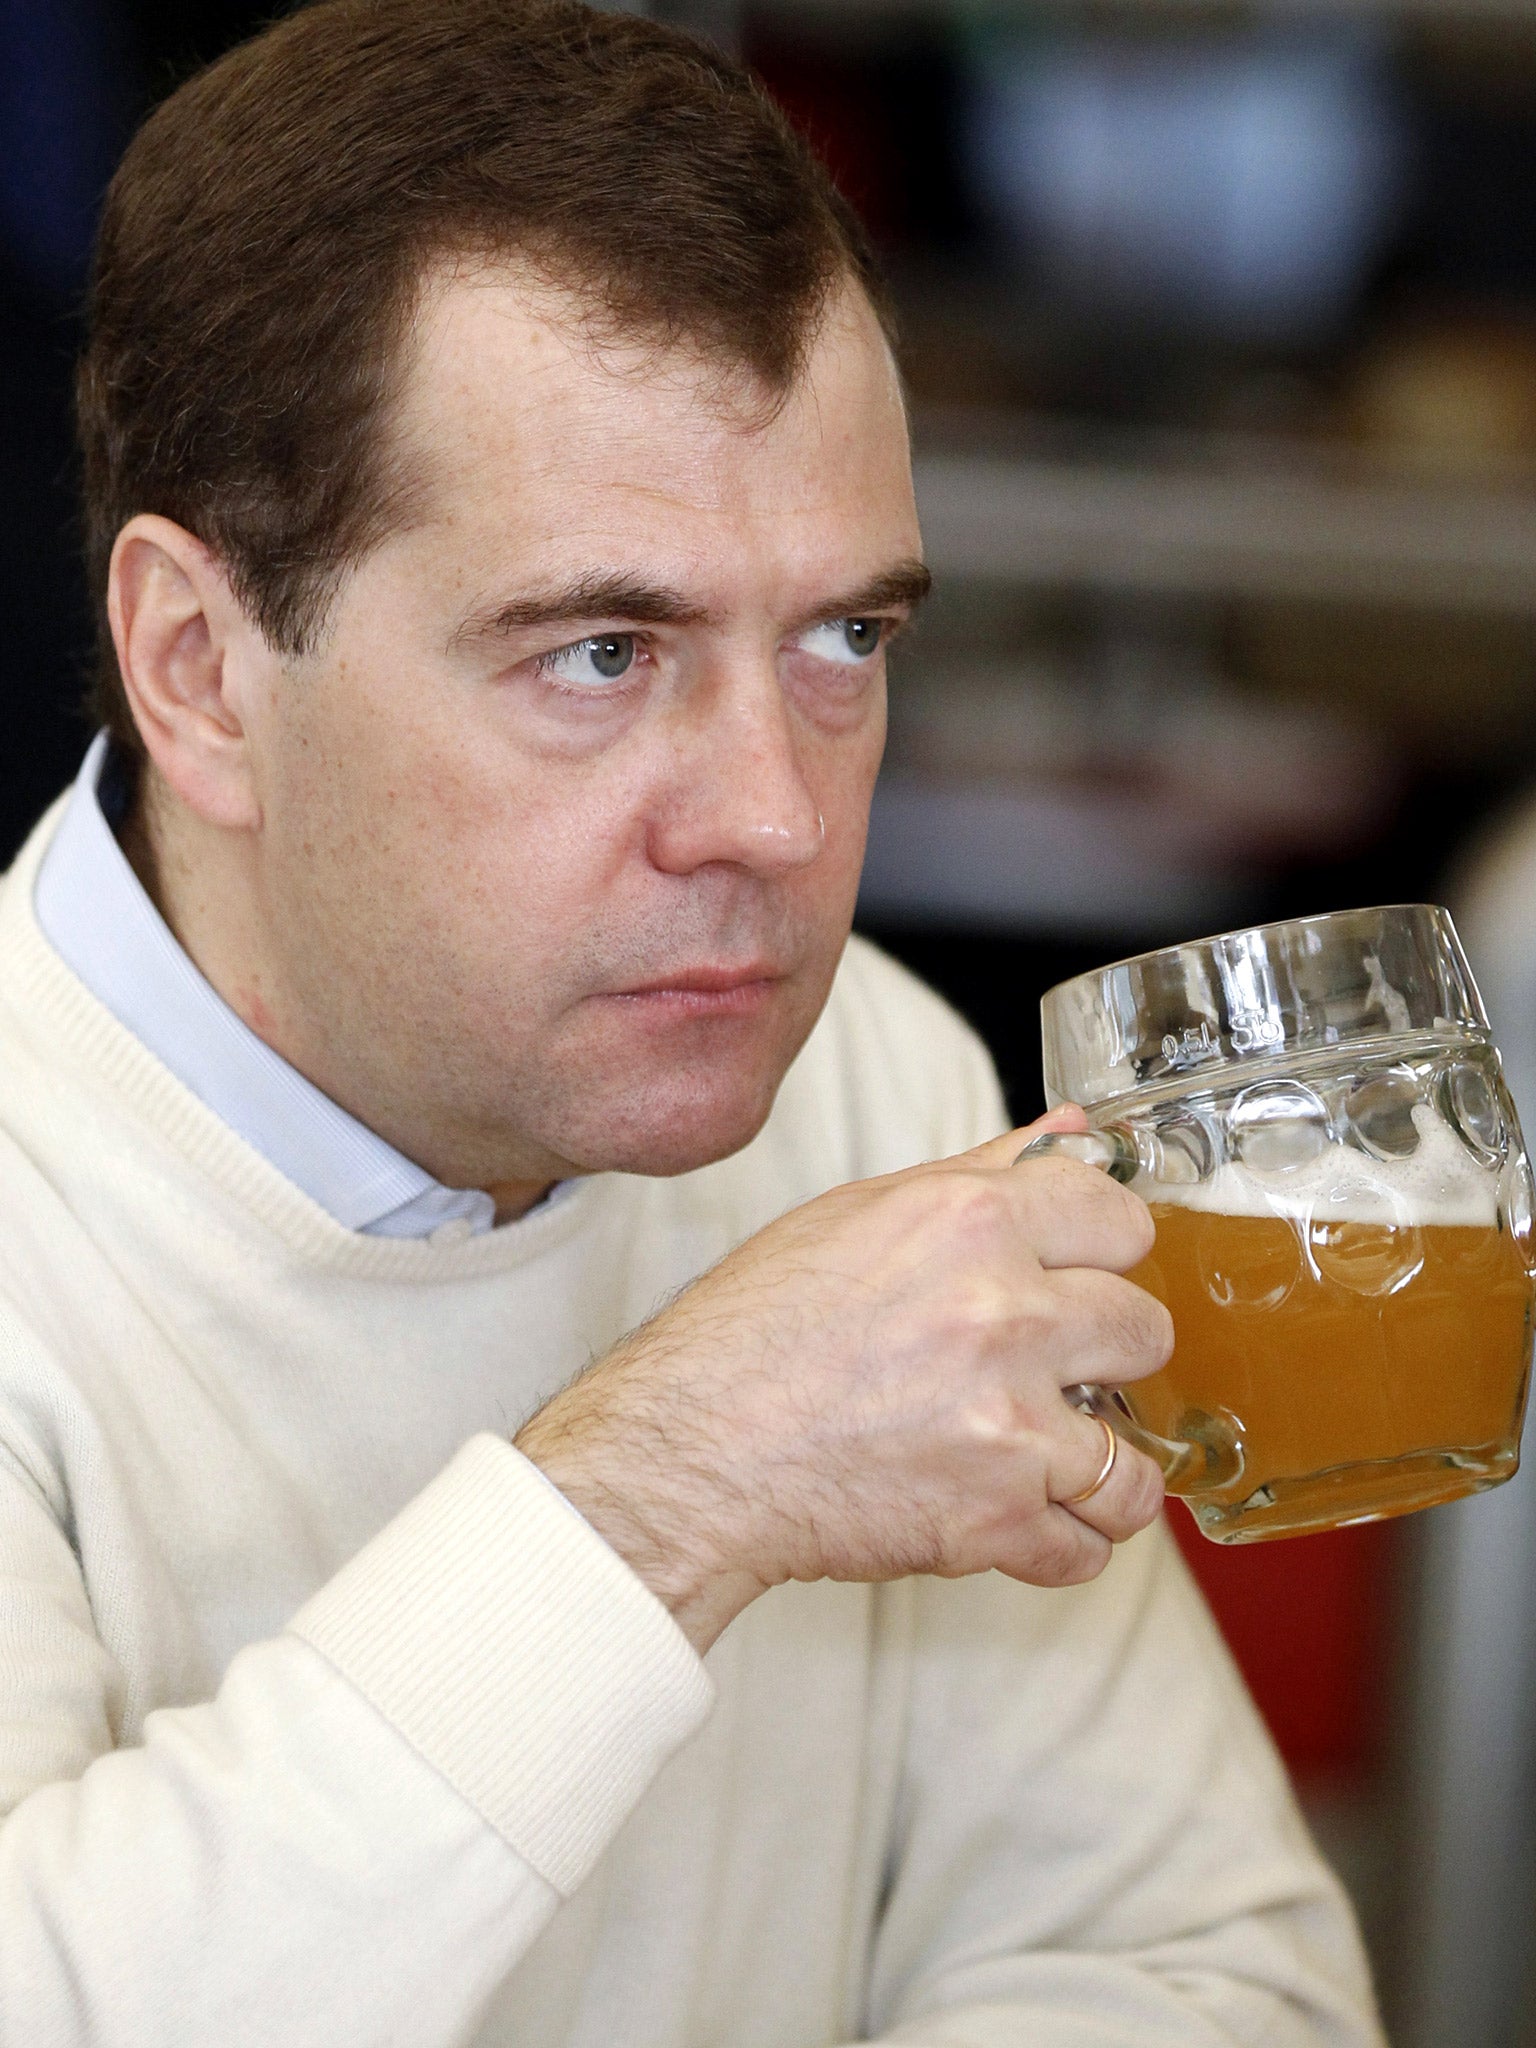 Former Russian President, Dmitry Medvedev, with a beer